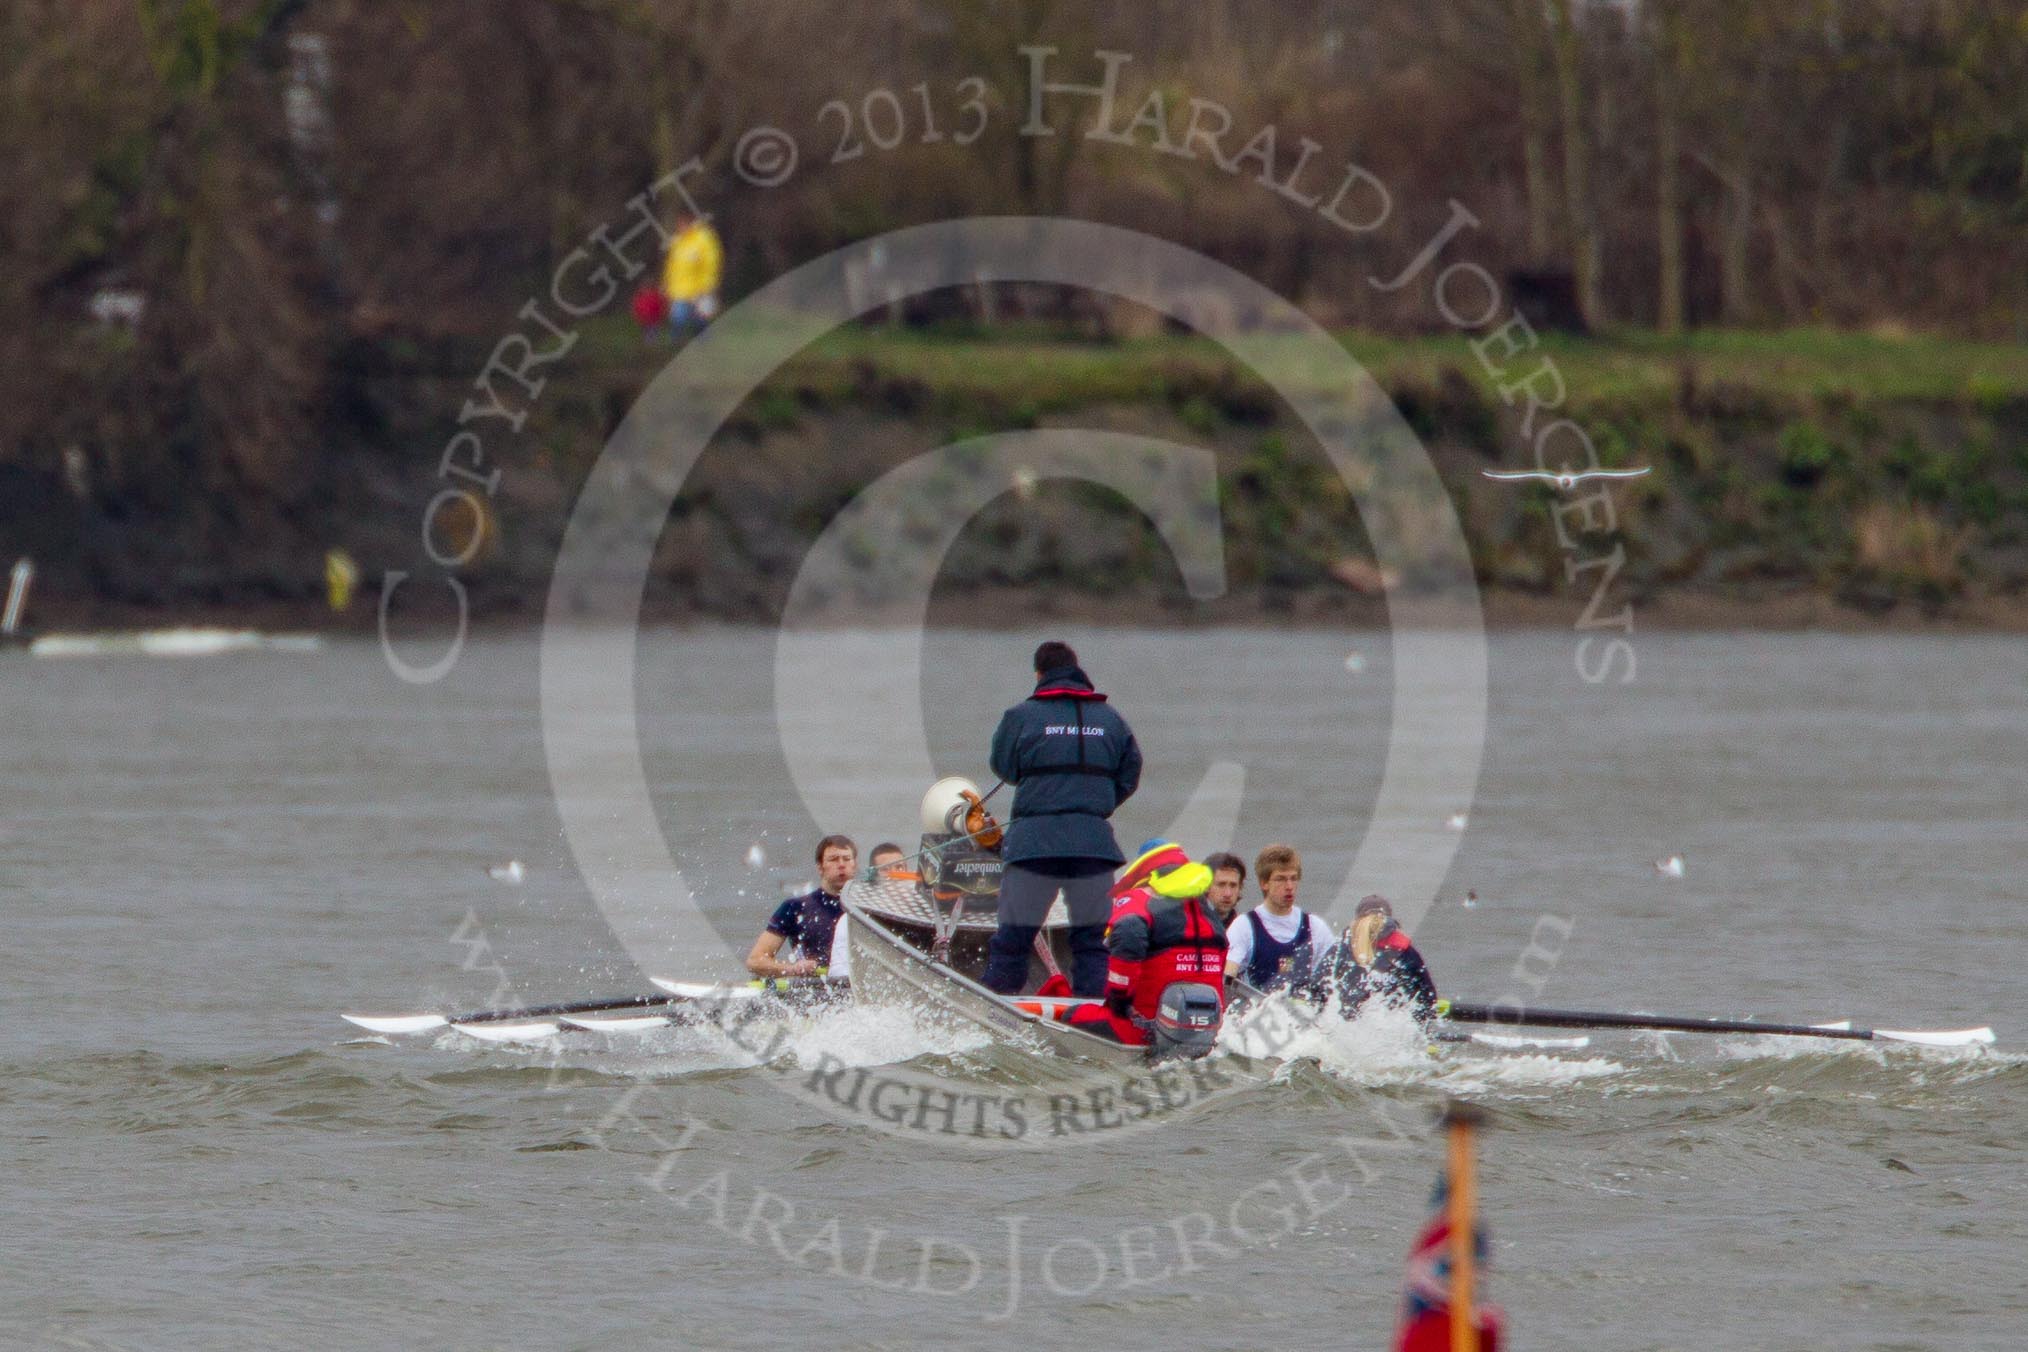 The Boat Race season 2013 - fixture CUBC vs Molesey BC, Goldie vs London RC.
Tideway,
London SW15,

United Kingdom,
on 16 March 2013 at 15:12, image #62